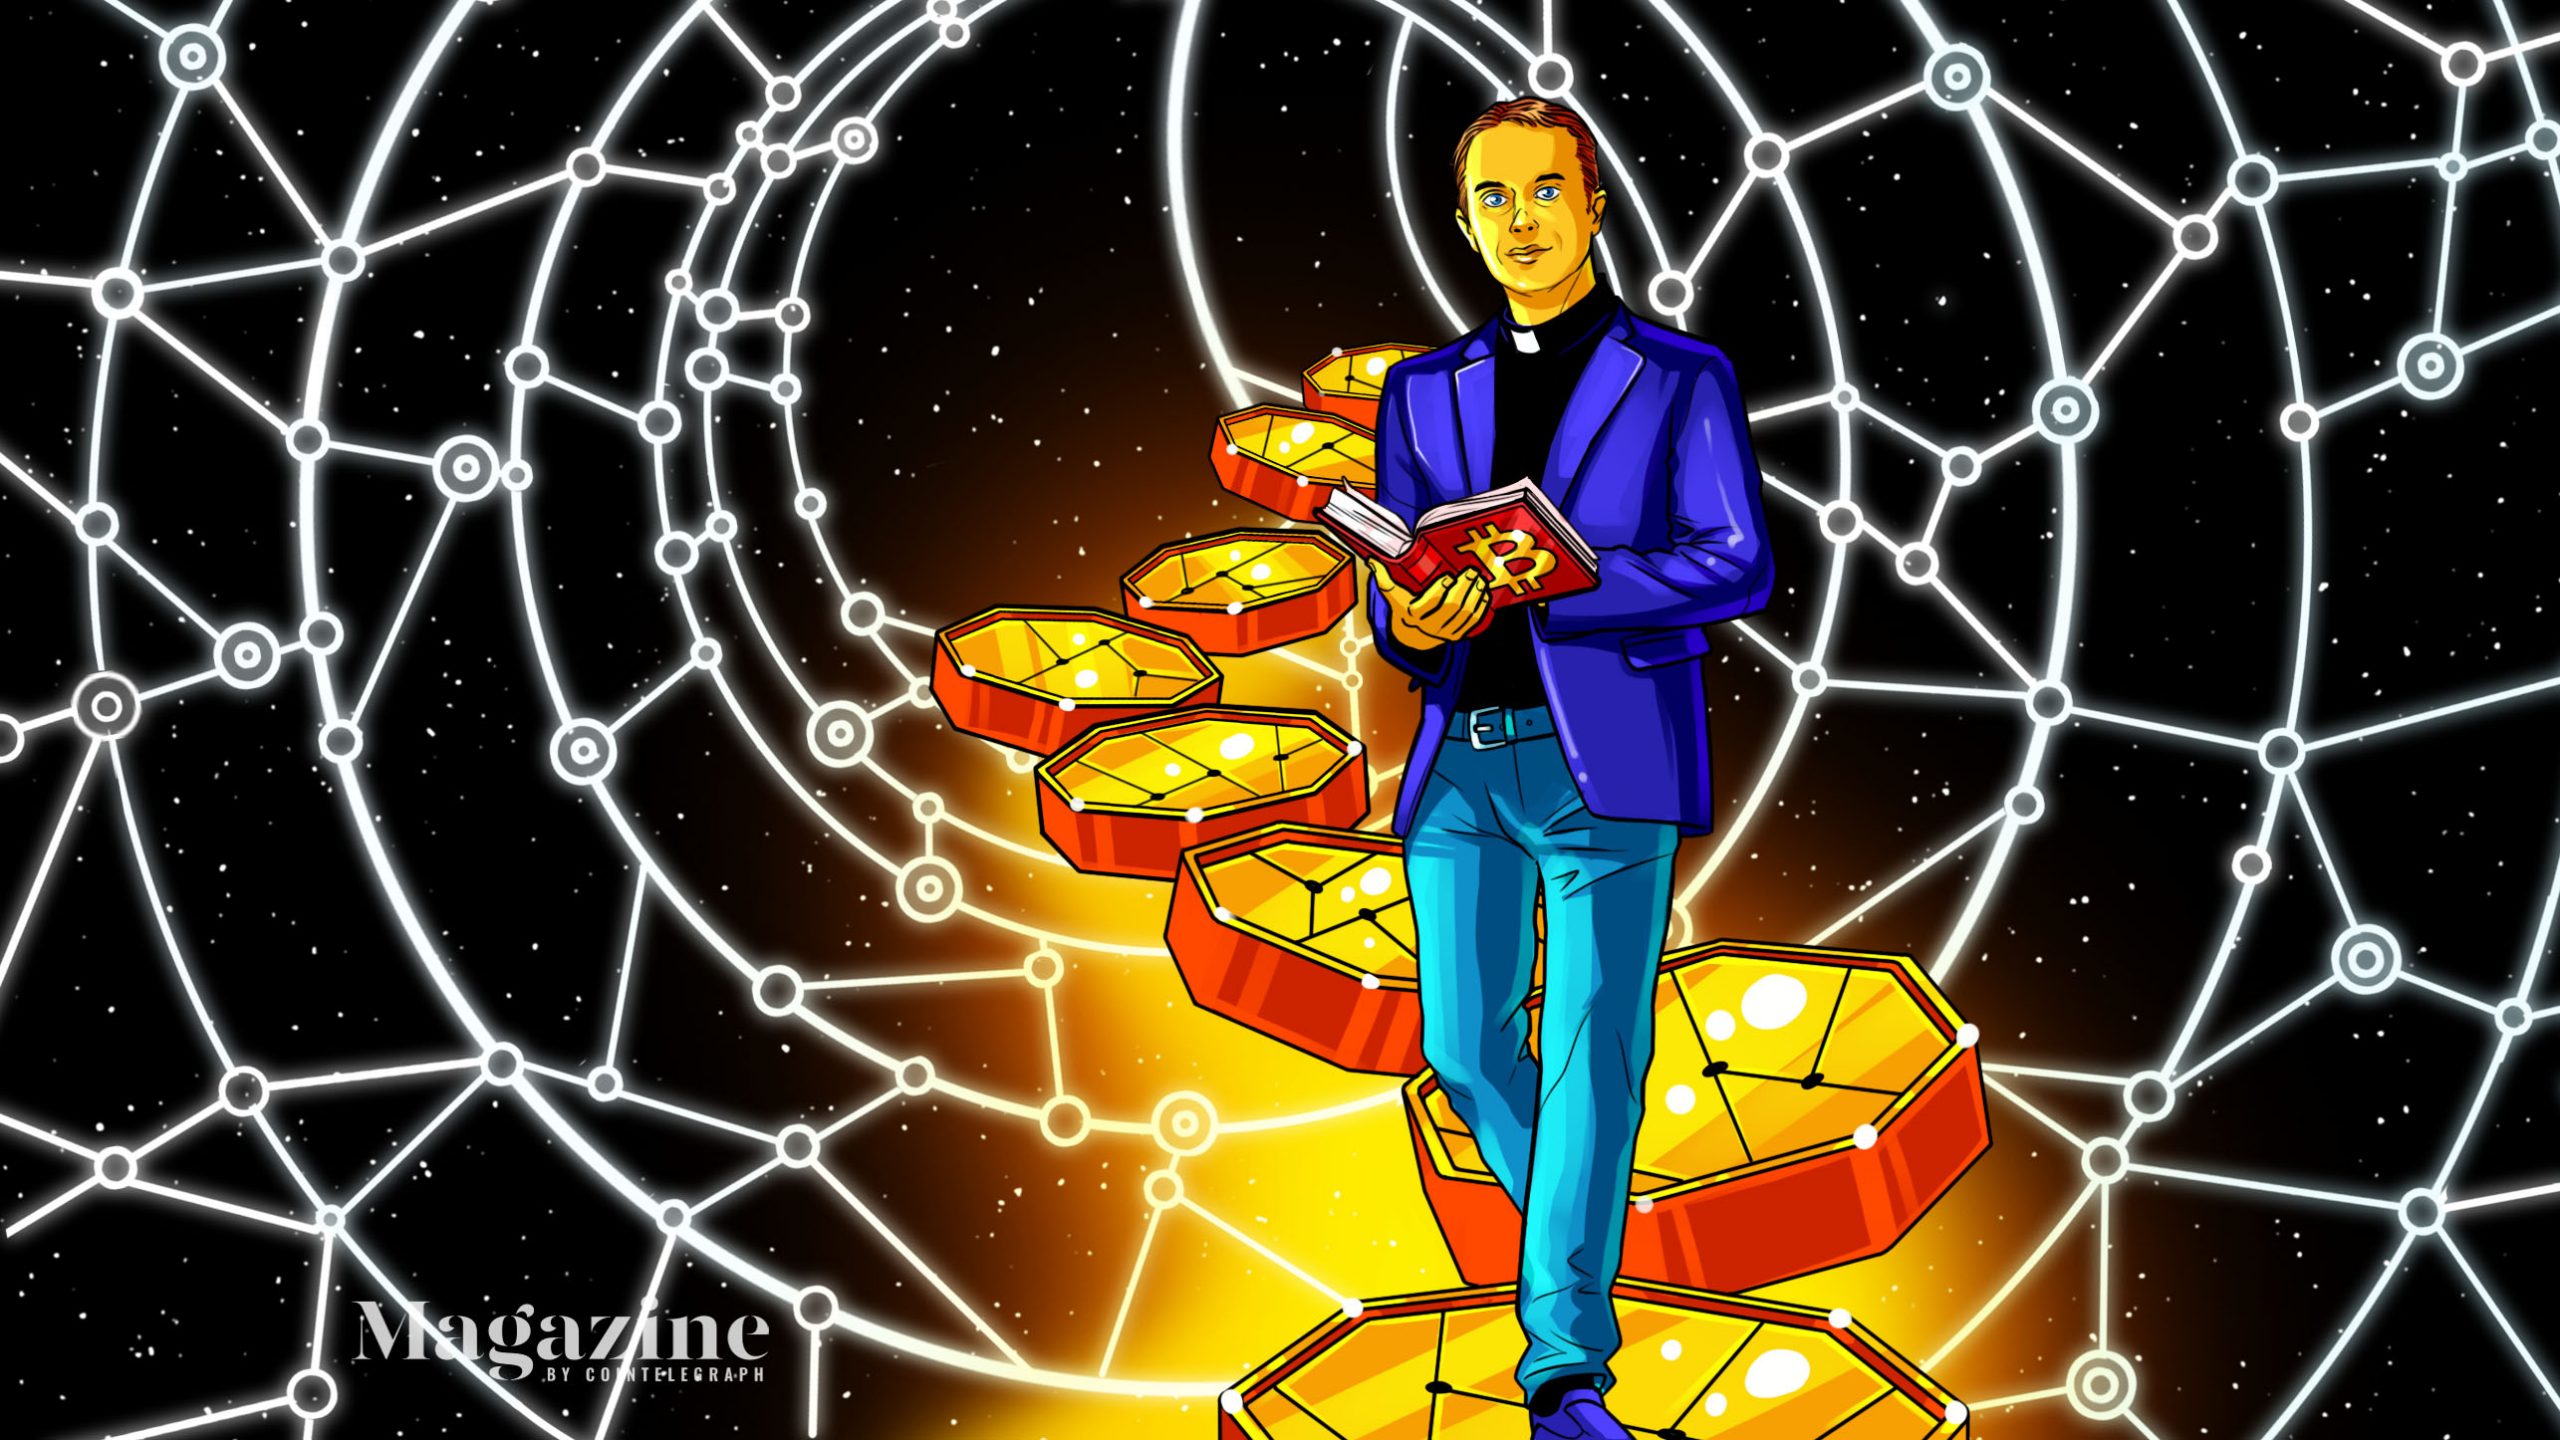 The reformed Bitcoin Maxi who saw the light: Erik Voorhees